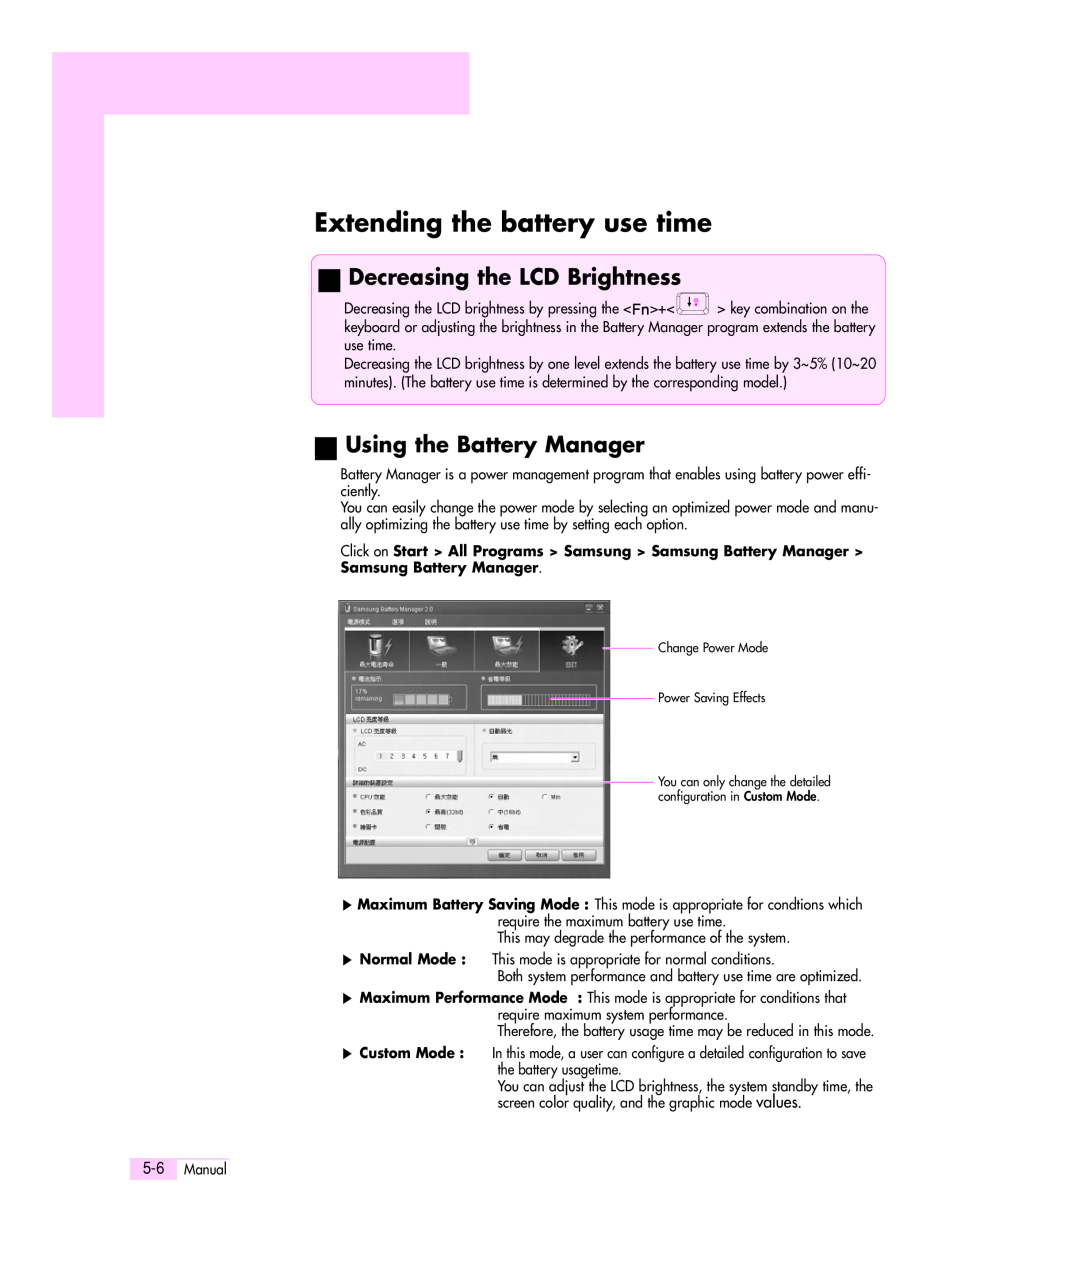 Samsung Q35 manual Extending the battery use time, Decreasing the LCD Brightness, Using the Battery Manager 